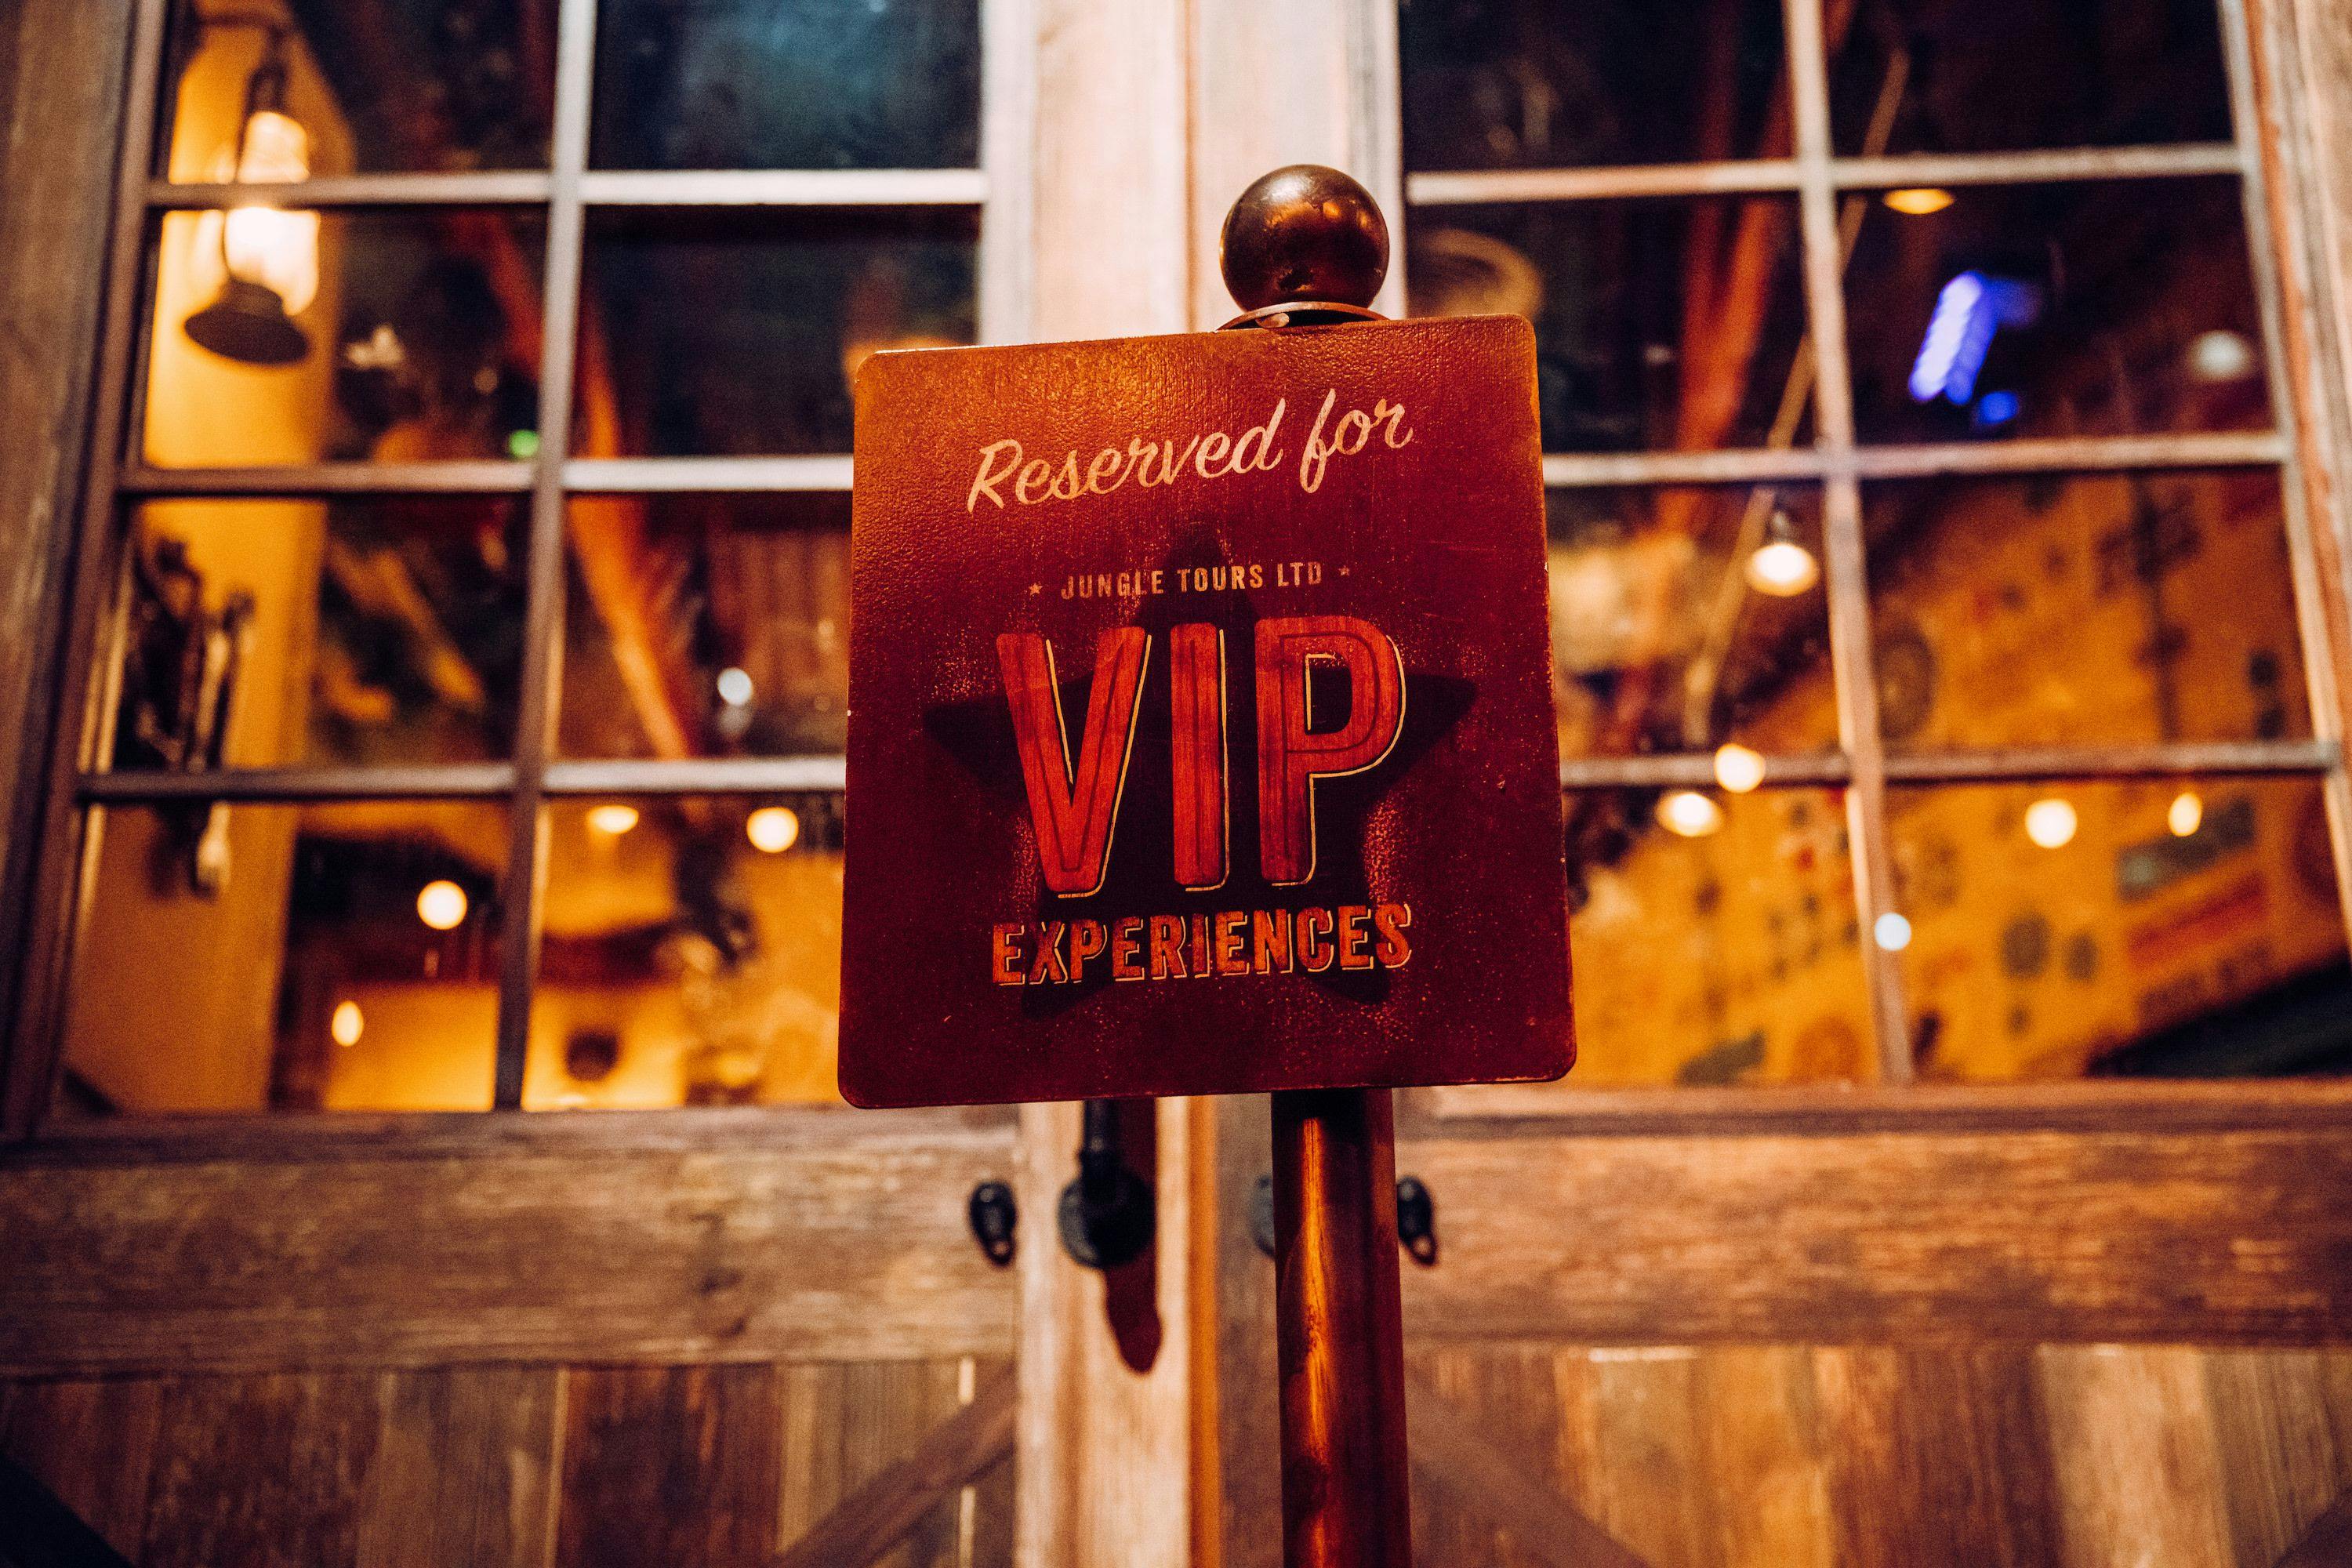 Image of the VIP experiences ‘reserved for’ sign written on a block of wood with a star. 